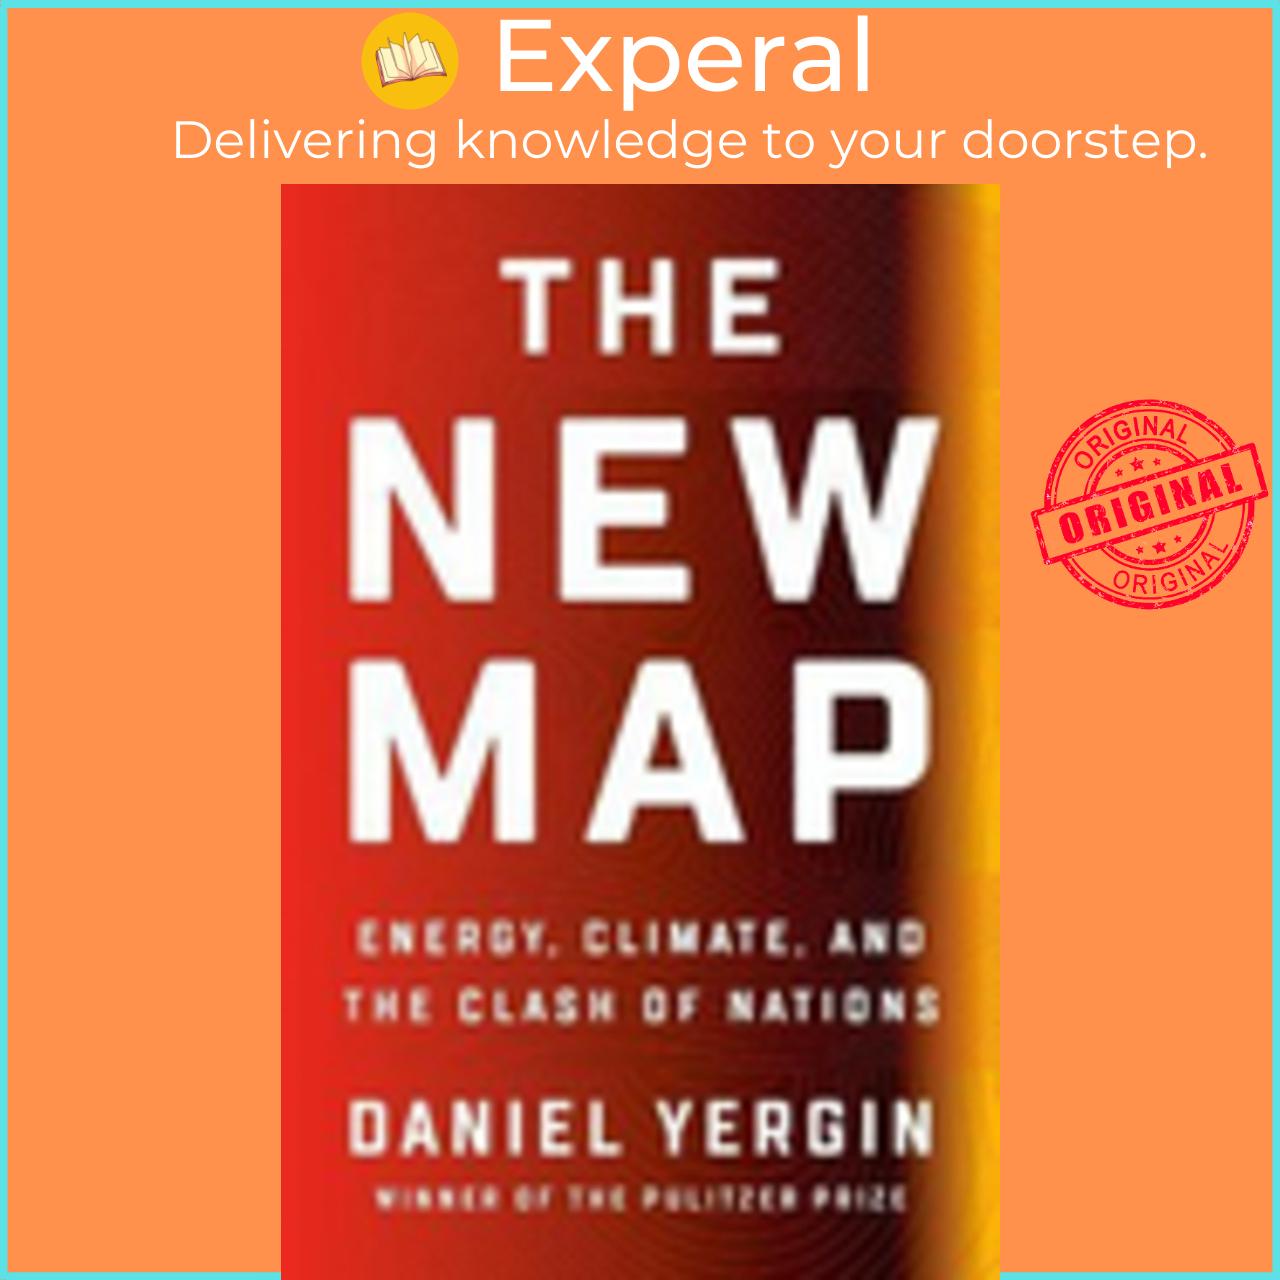 Sách - The New Map : Energy, Climate, and the Clash of Nations by Daniel Yergin (US edition, hardcover)